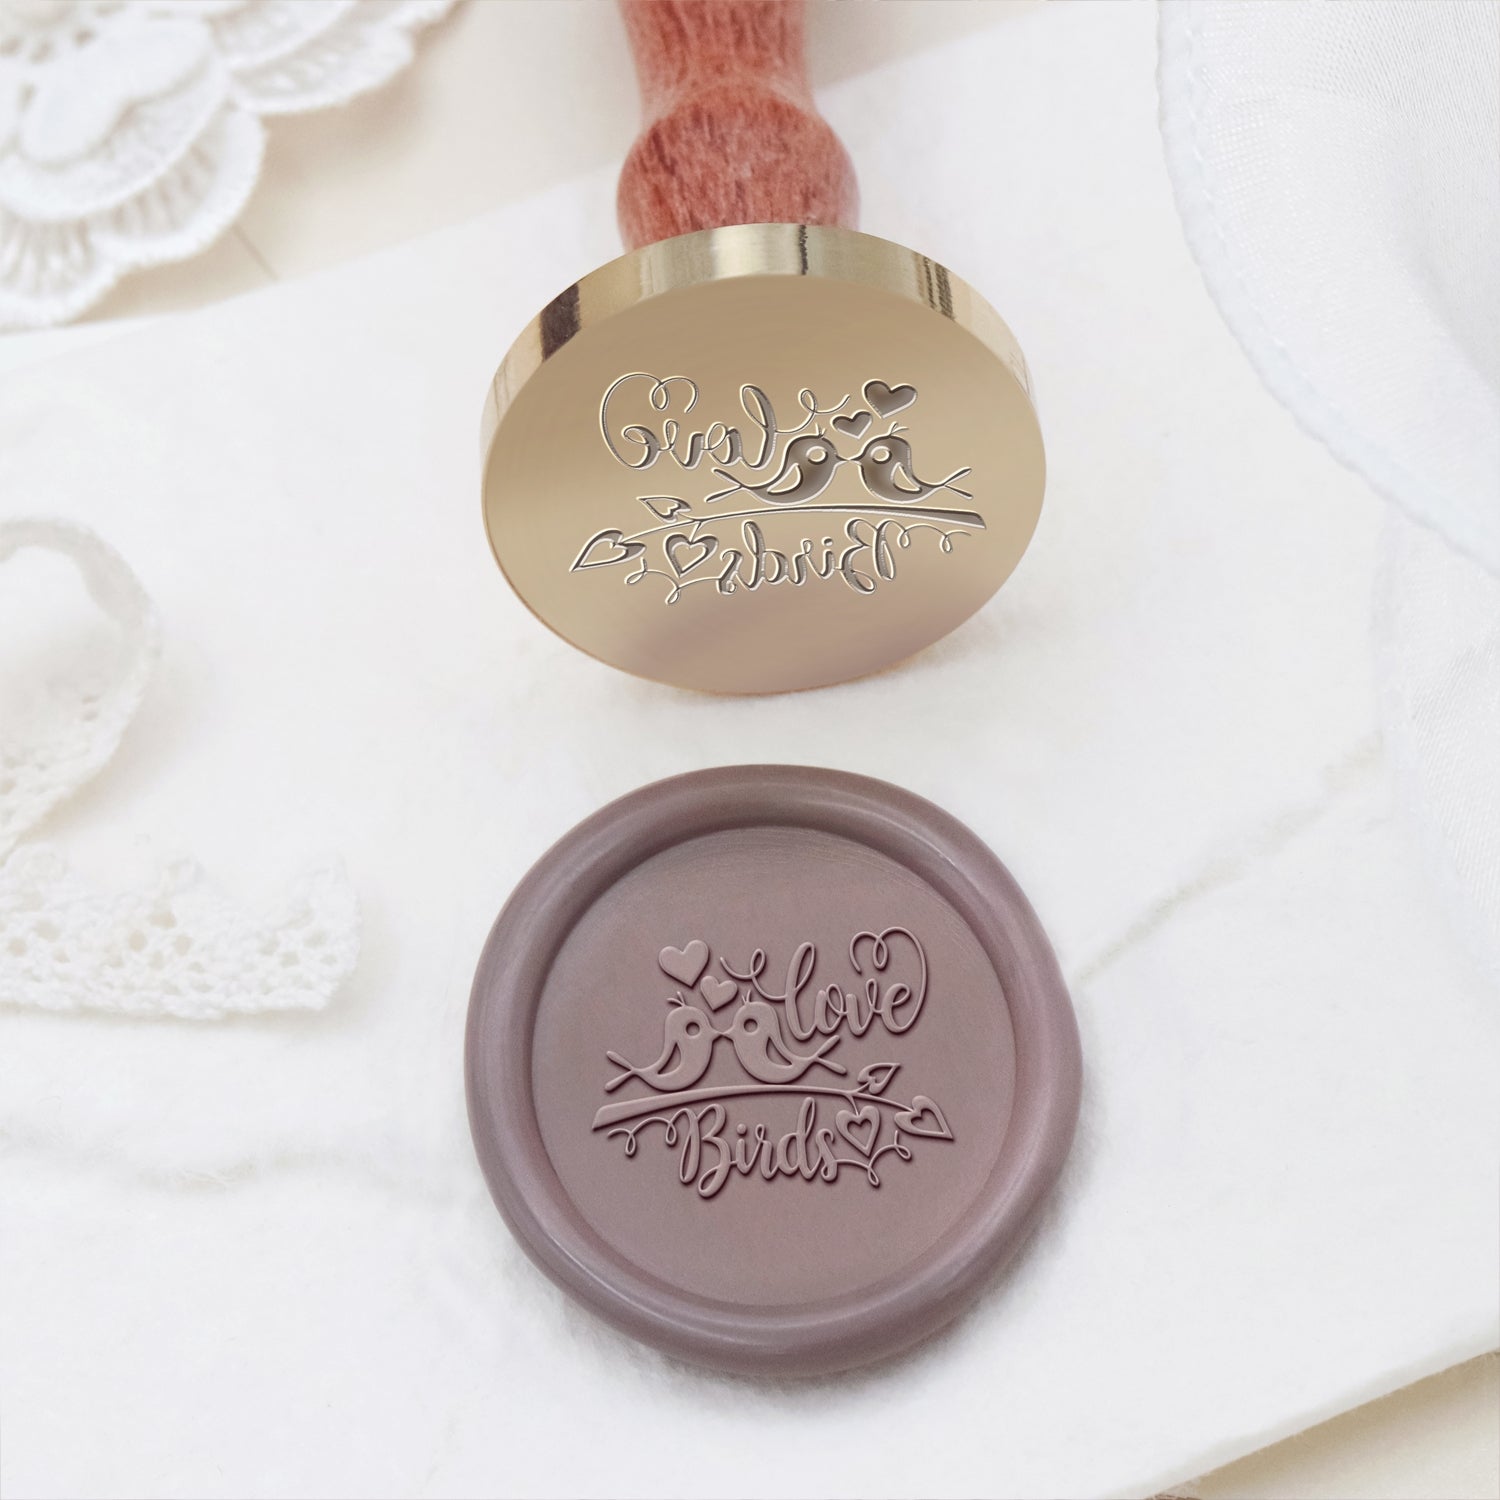 2 Pieces Wax Seal Stamp Set, Valentine's Day Rose Heart Wax Seal Stamp with  Wooden Handle Decorating on Wedding Invitation Envelope Sealers Letters